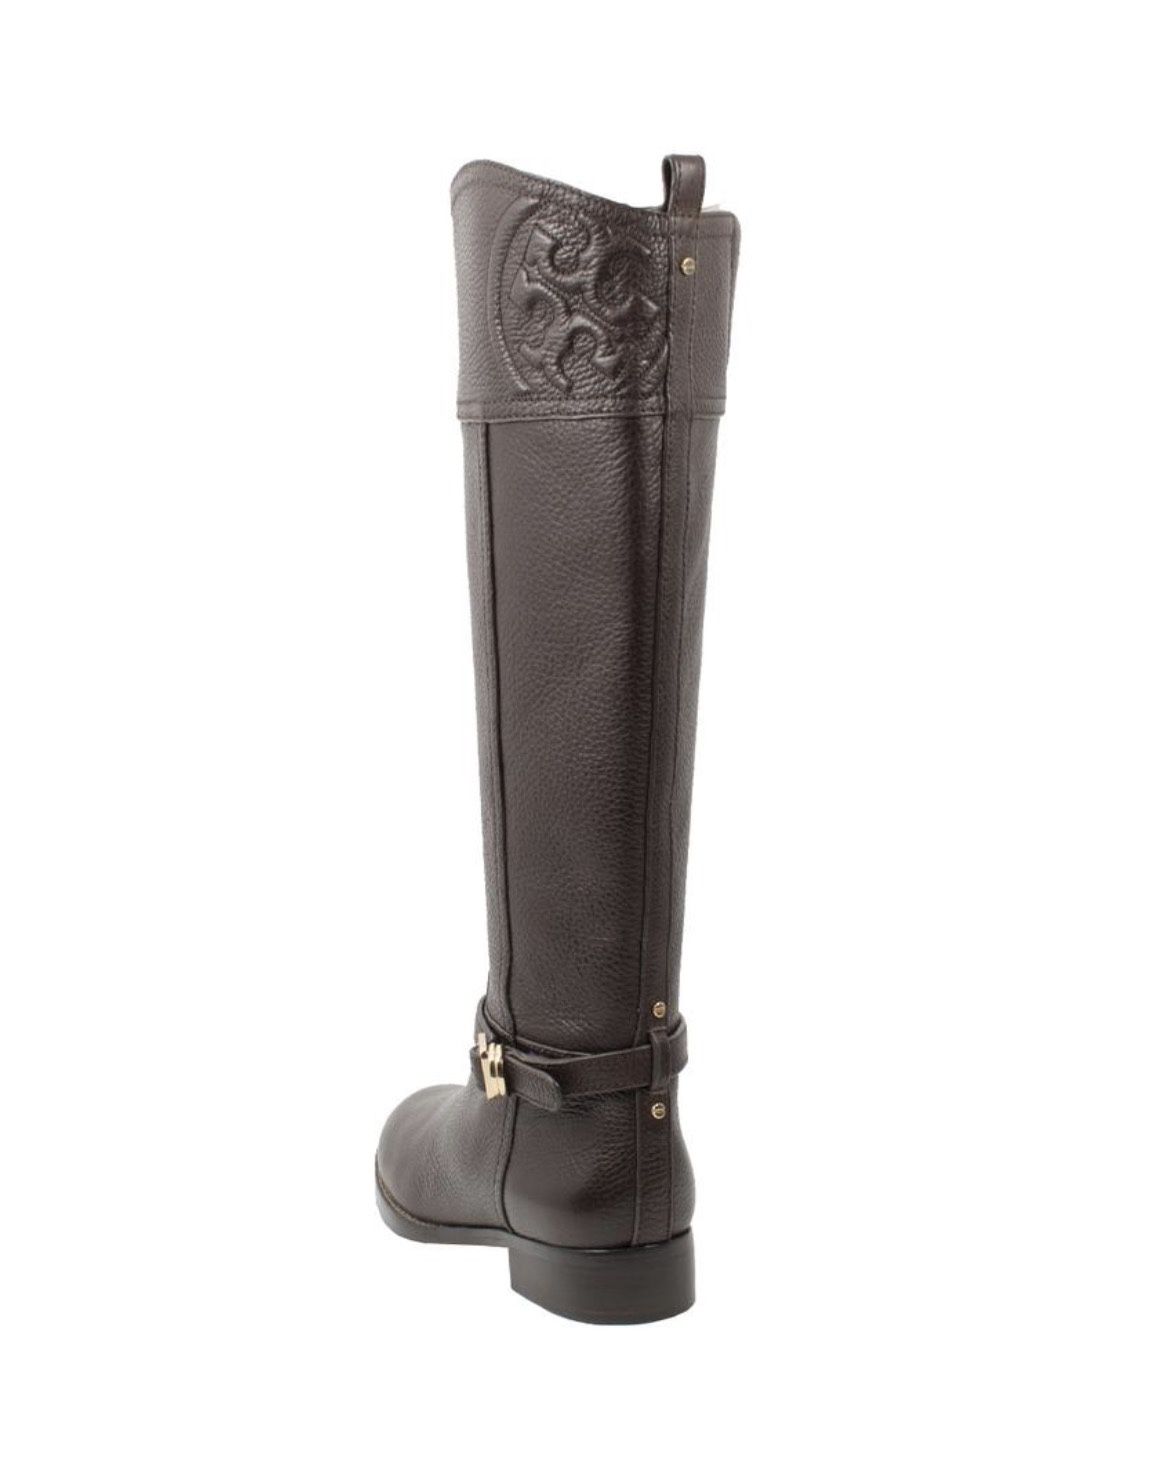 TORY BURCH MARLENE COCONUT RIDING BOOTS (size 7)